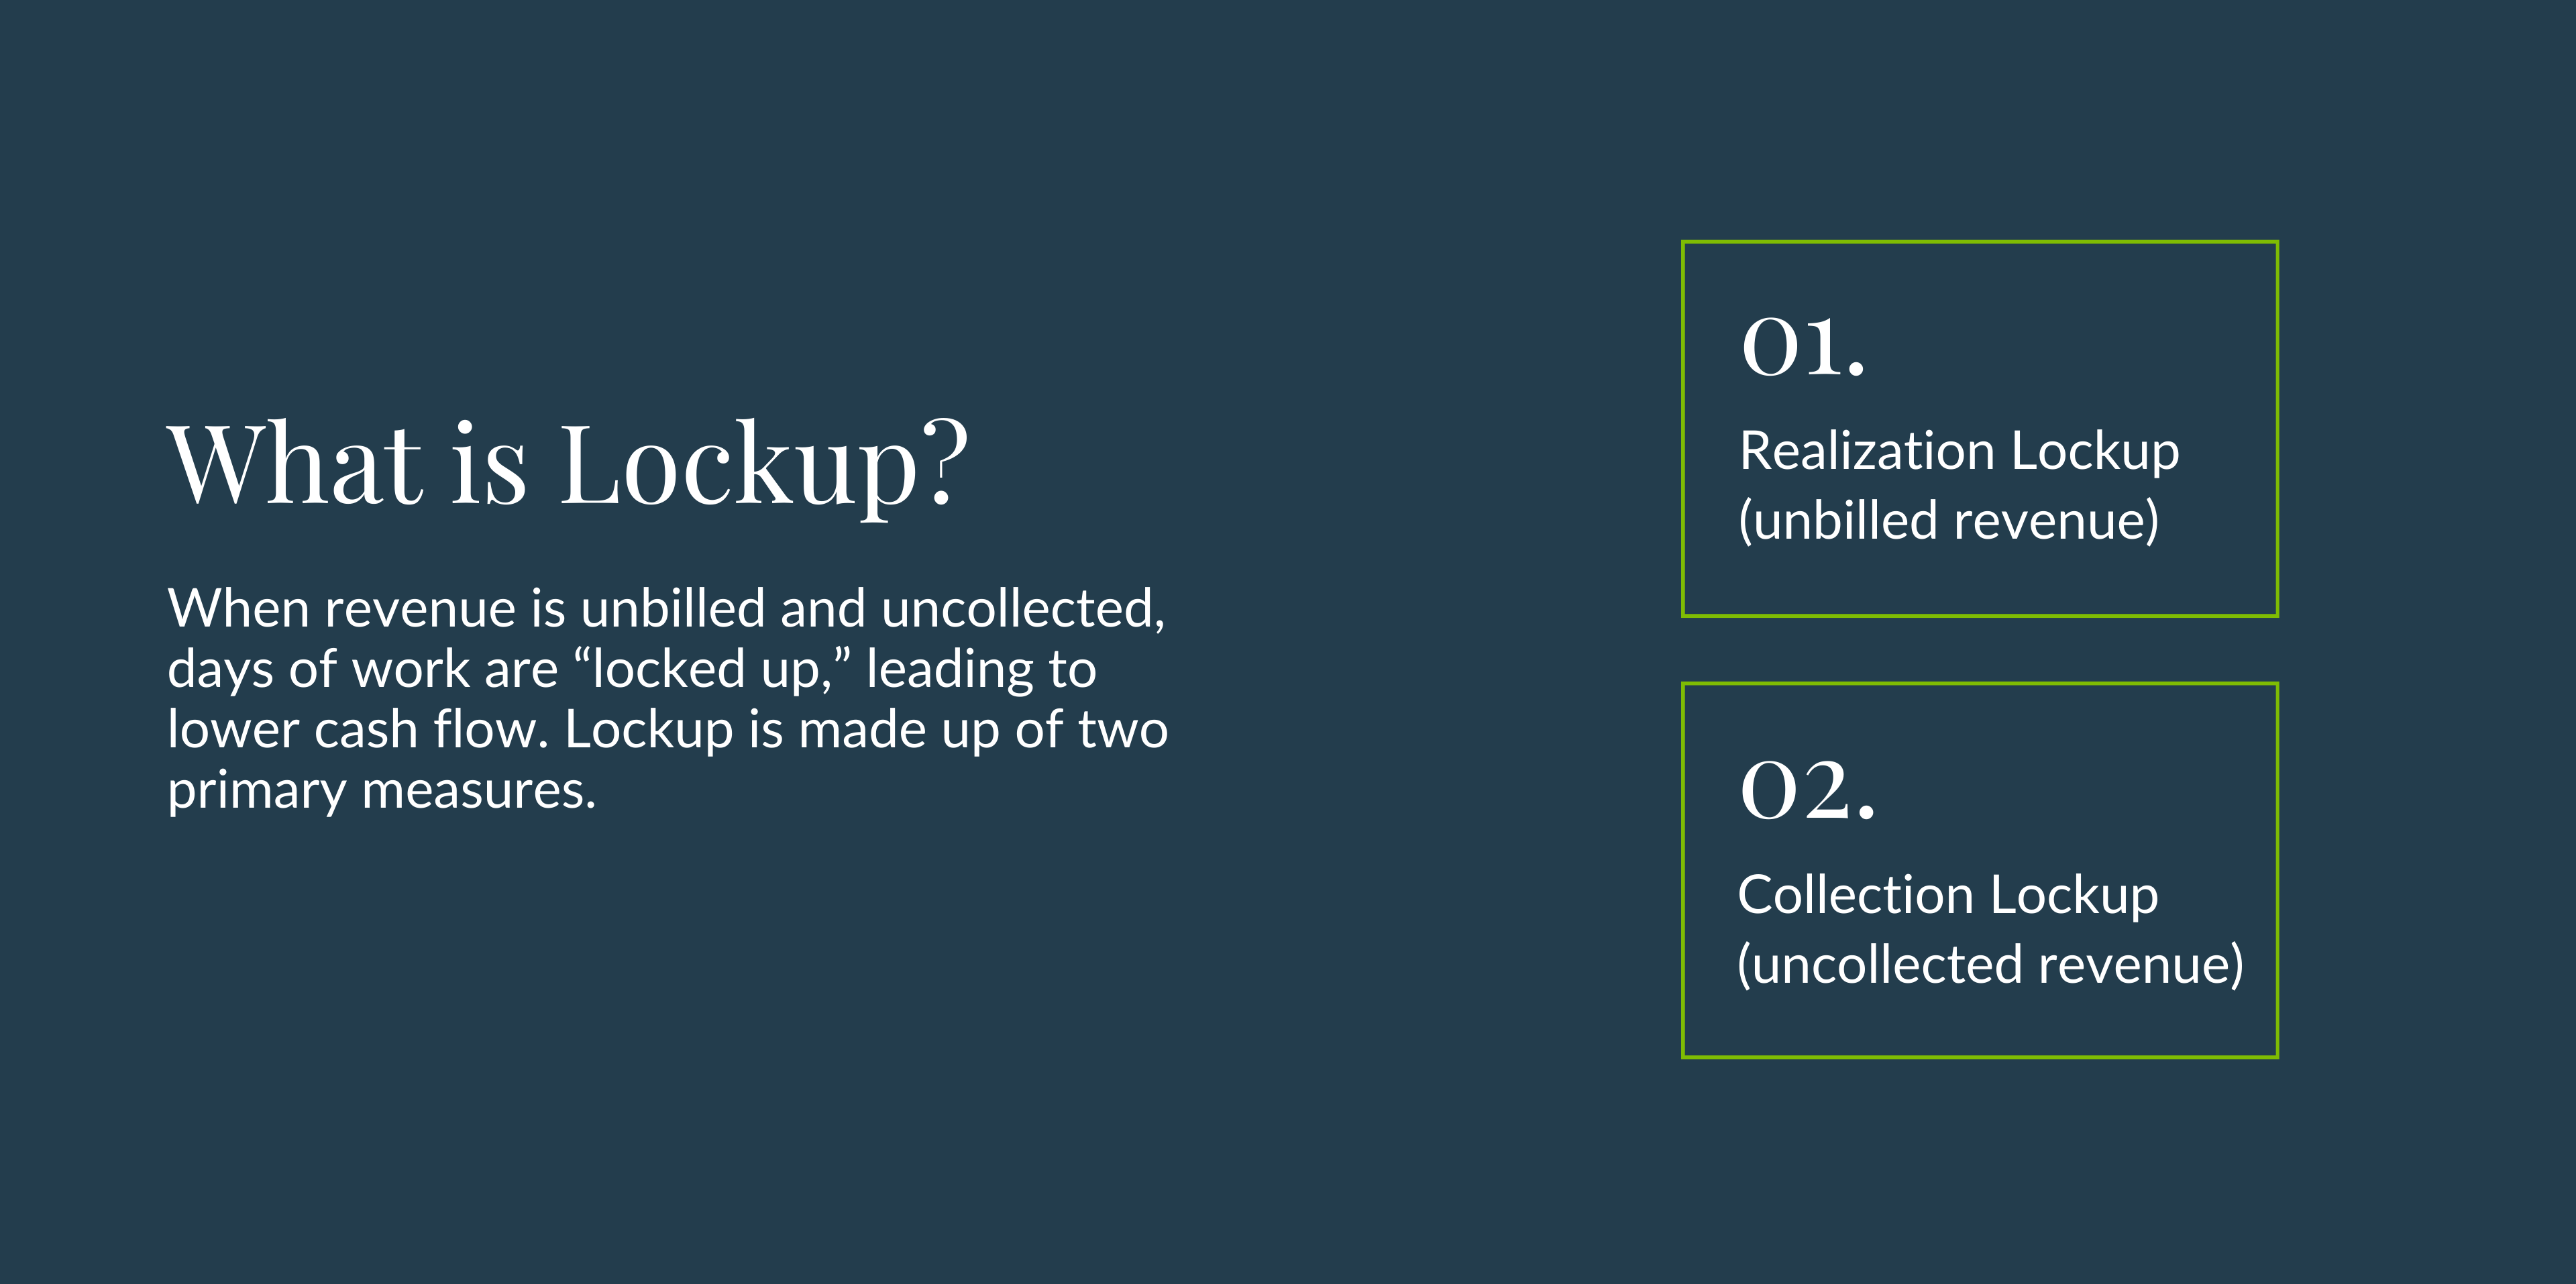 A graphic with text that leads: "What is Lockup? When revenue is unbilled and uncollected, days of work are "locked up," leading to lower cash flow. Lockup is made up of two primary measures. 01. Realization Lockup (unbilled revenue), 02. Collection Lockup (uncollected revenue)"